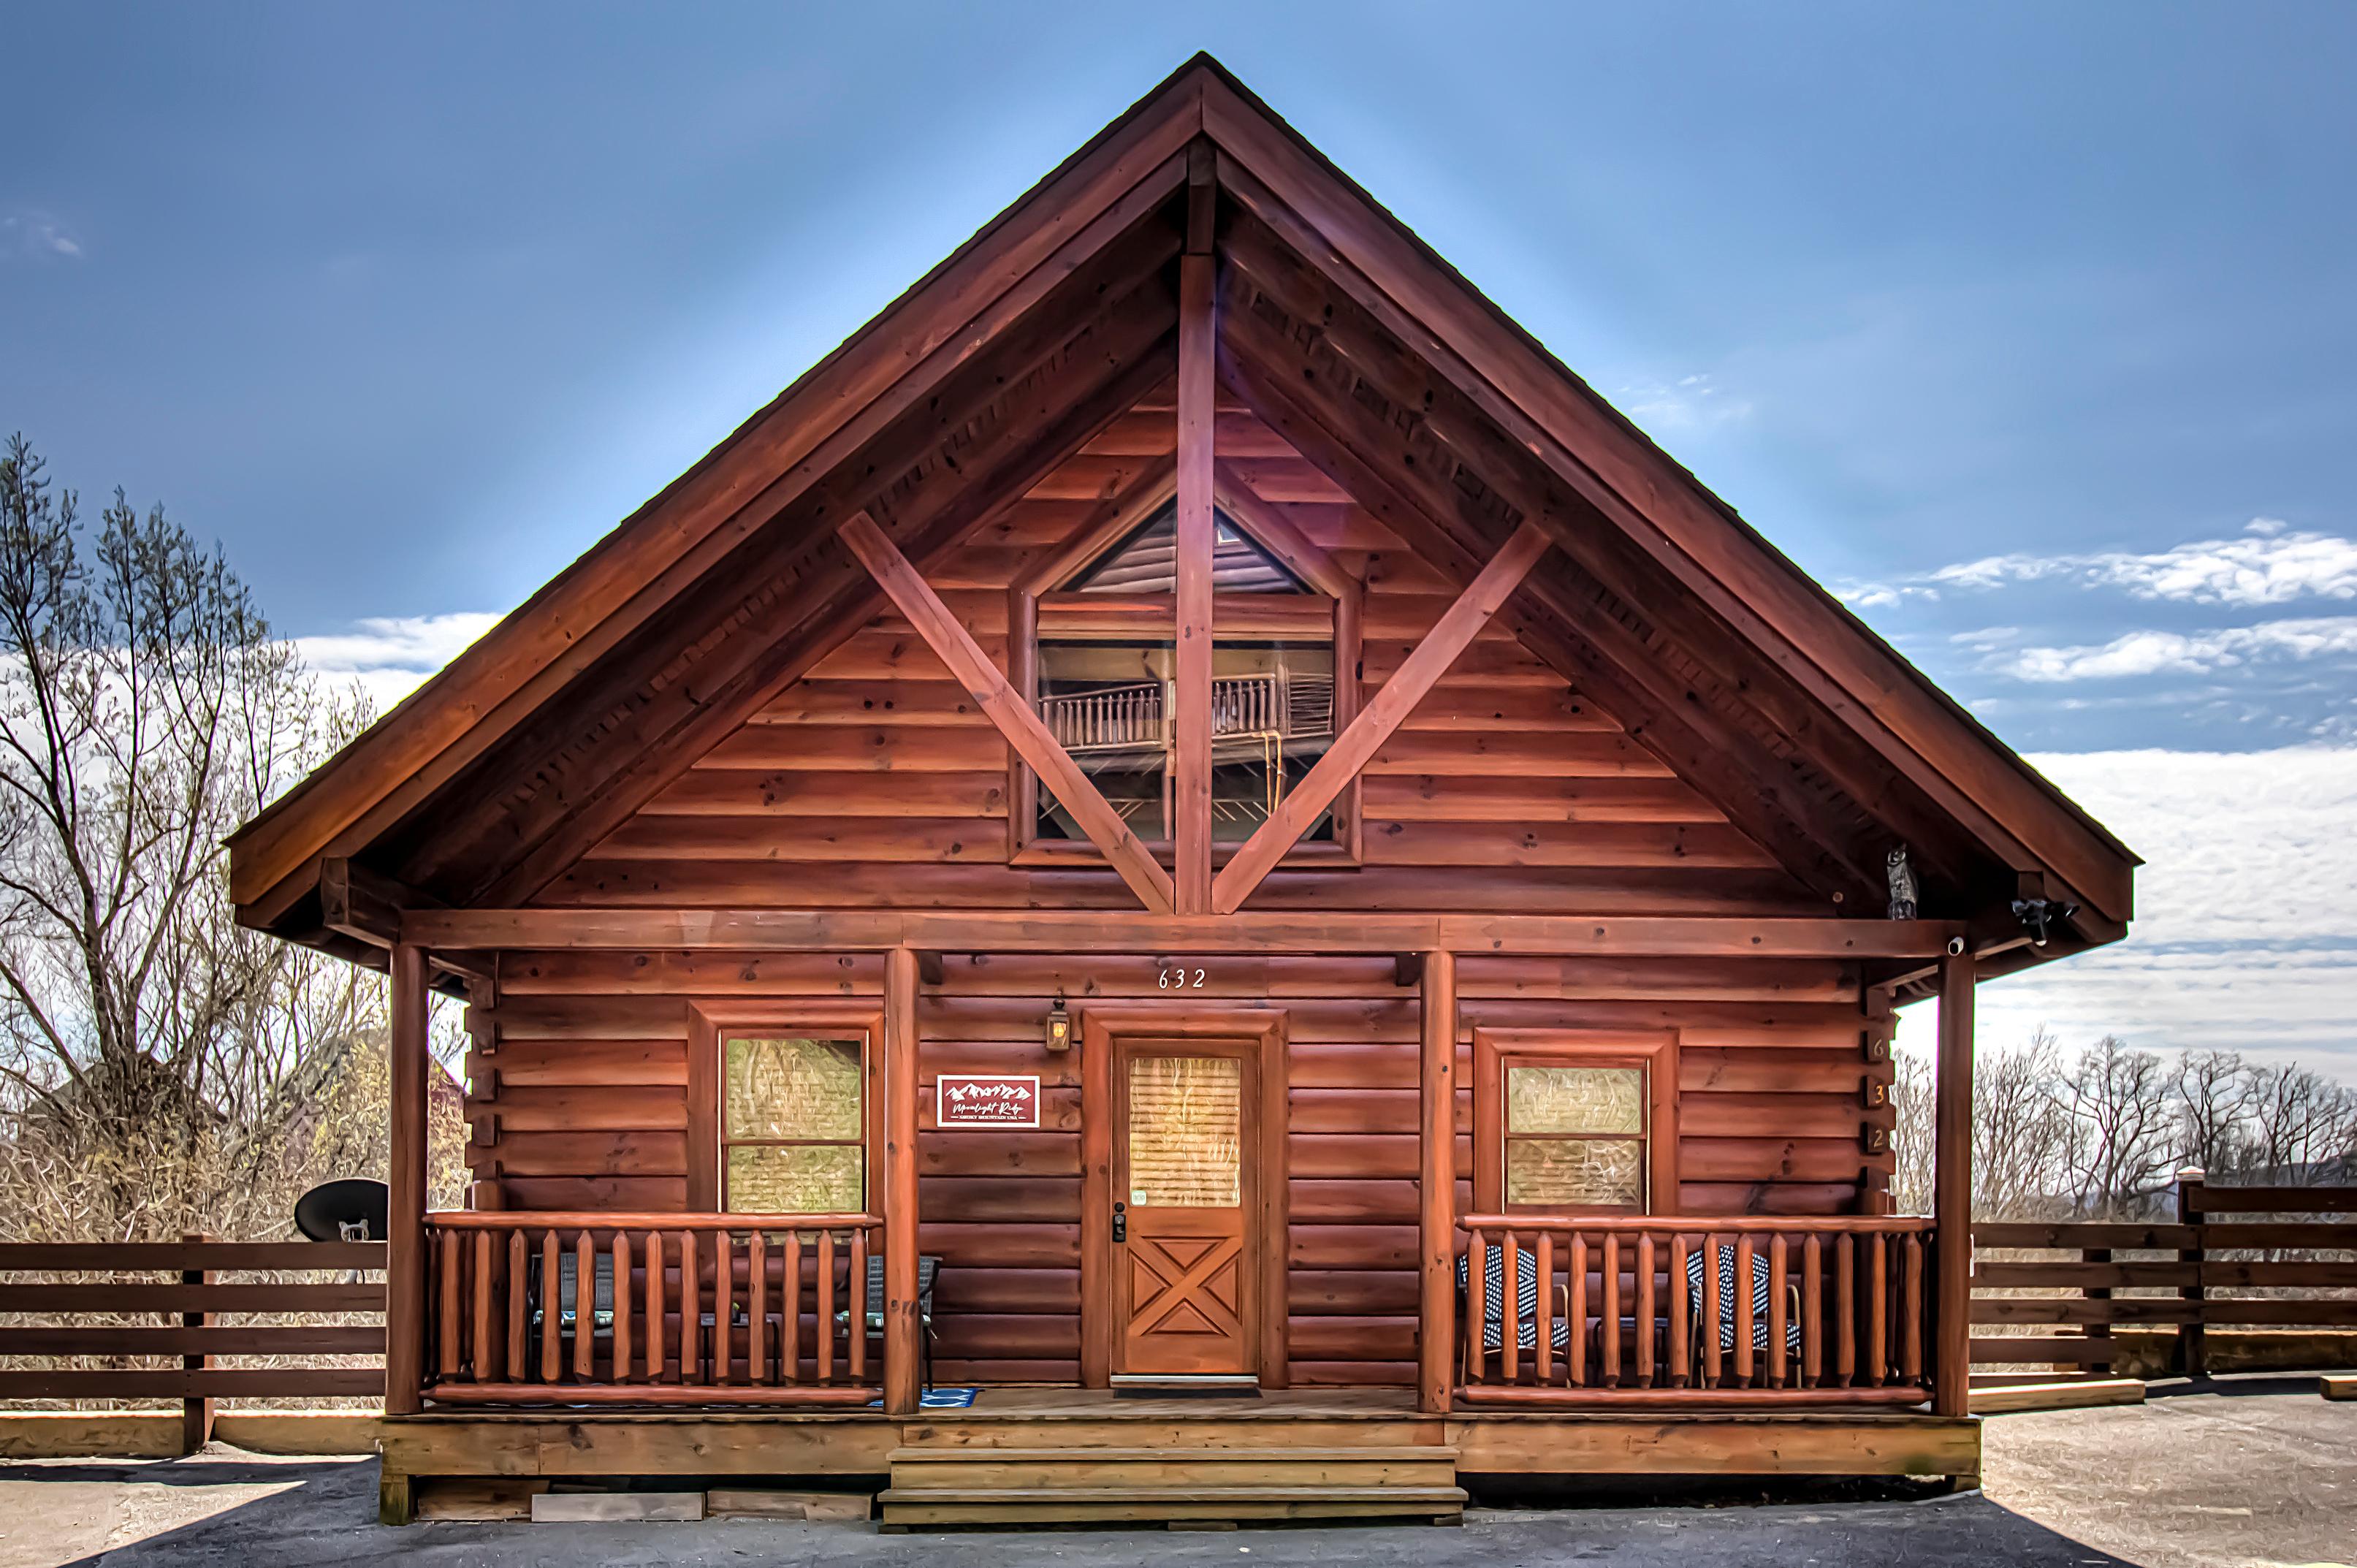 Smoky Mountain Cabin has it all at Moonlight Ridge including arcade video games, hot tub, pool table, smart TVs, internet, gas grill, and so much more!